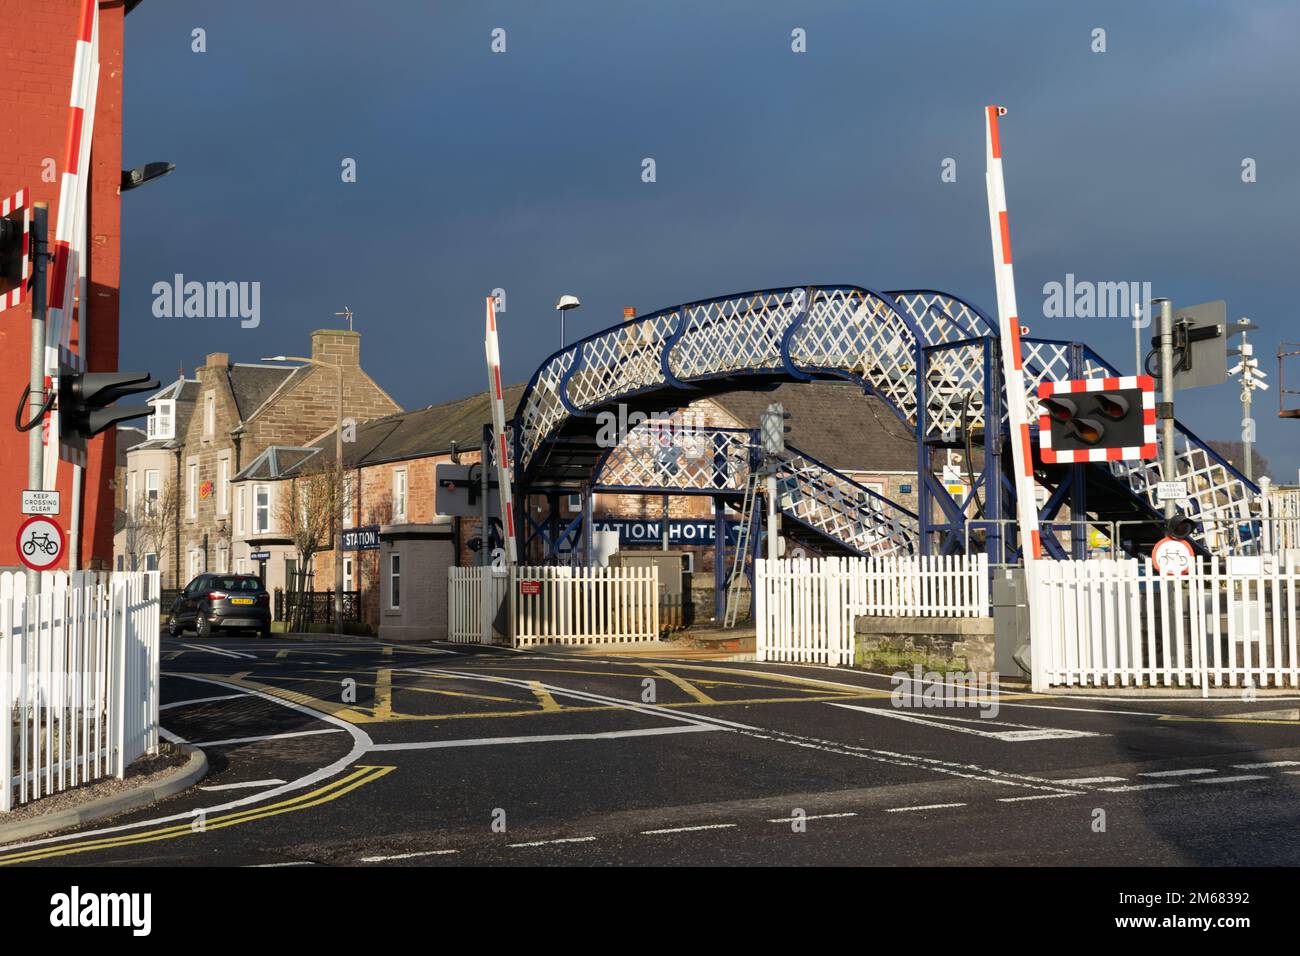 Carnoustie train station level crossing with barrier and footbridge over railway . Scotland UK. Stock Photo